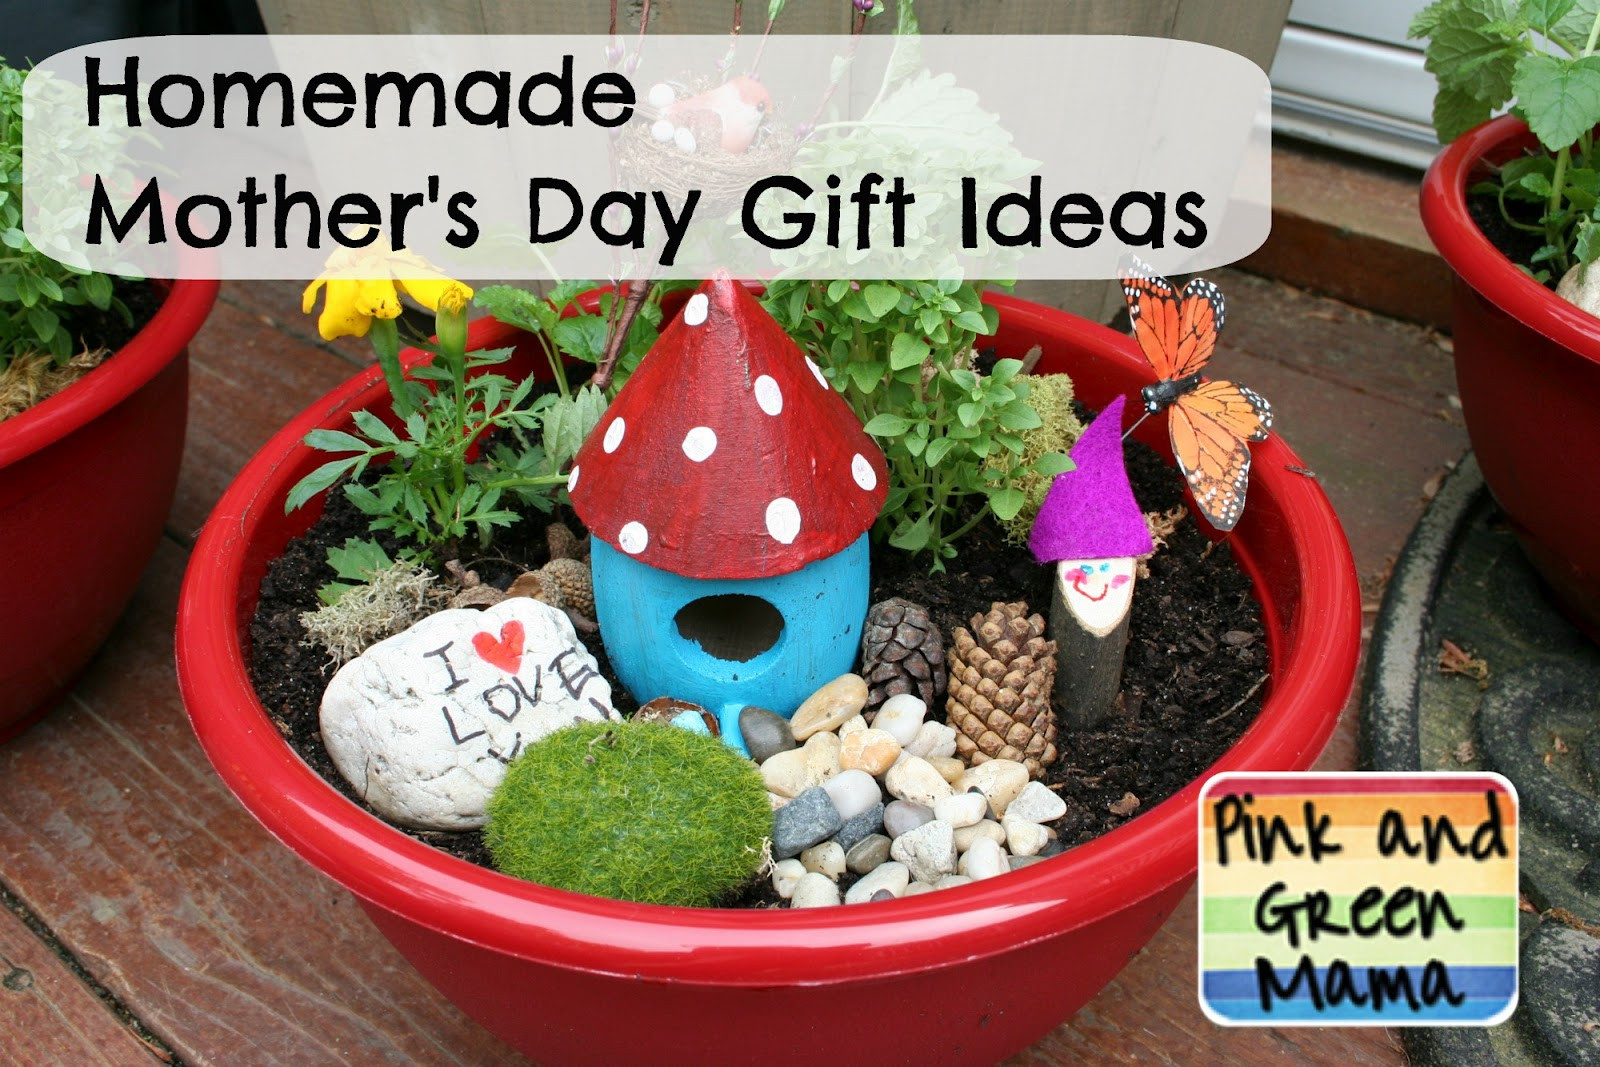 Awesome Mothers Day Gift Ideas Pink and Green Mama Homemade Mother s Day Gift Ideas